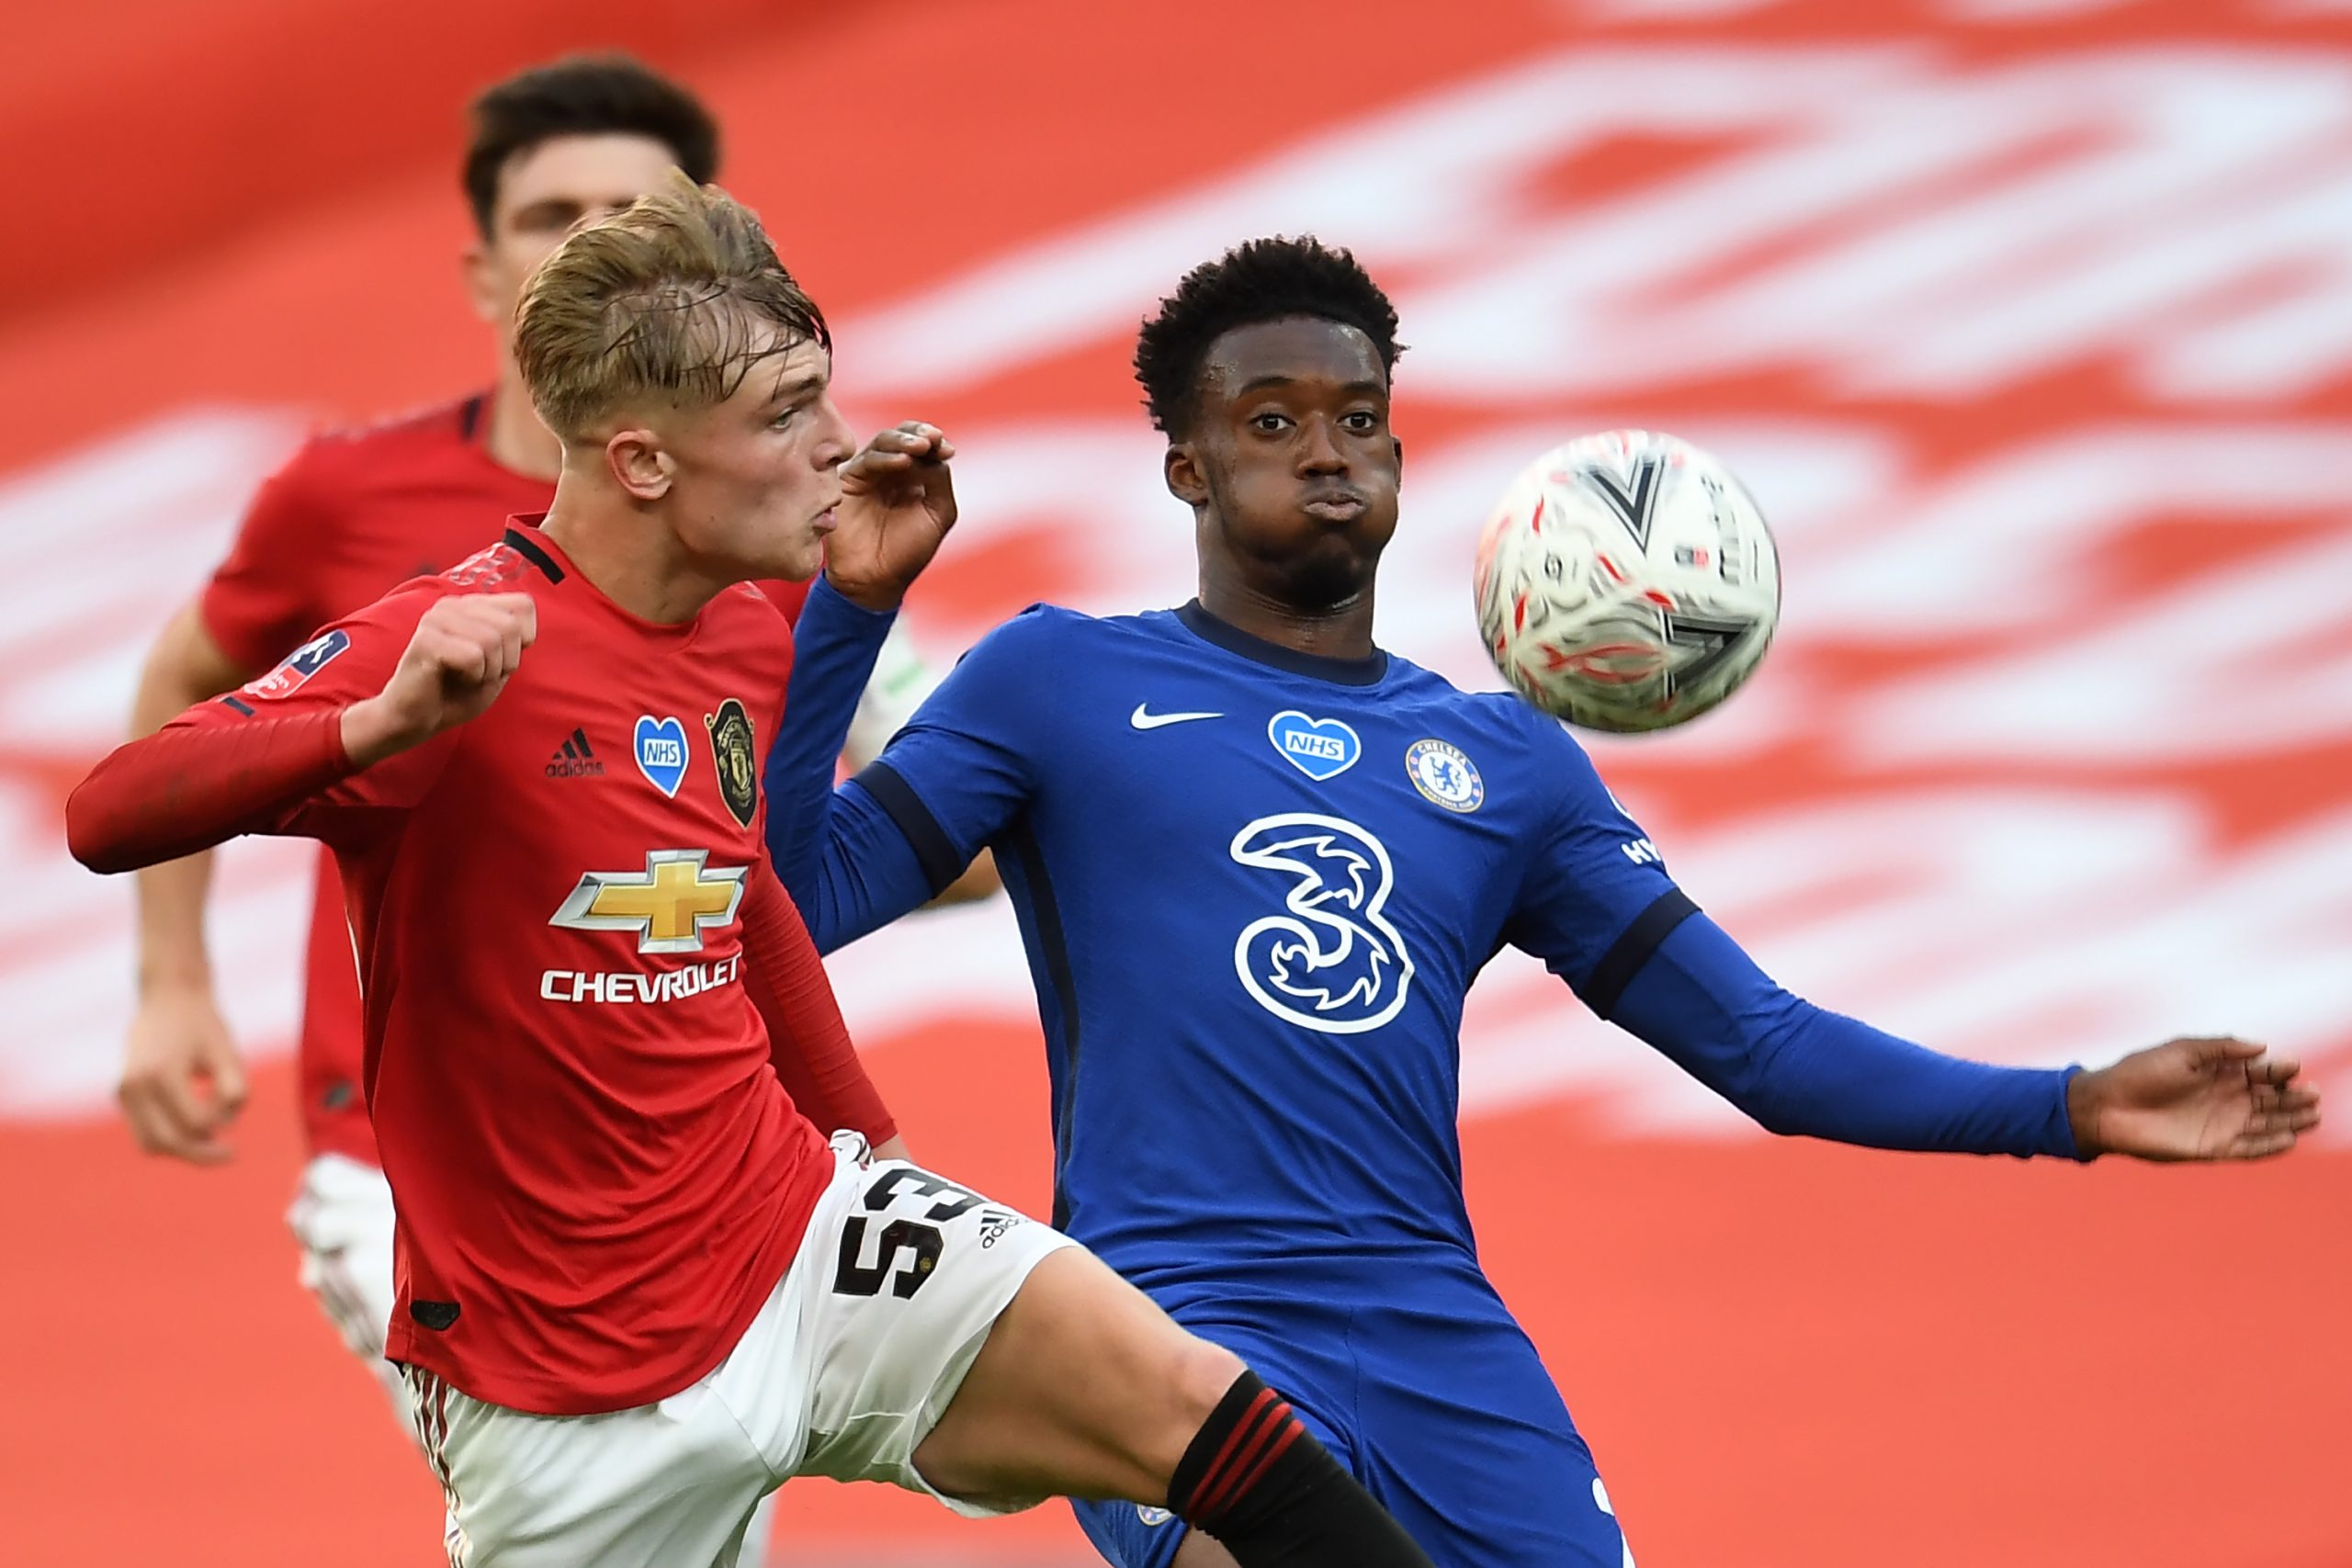 Callum Hudson-Odoi (R) in action against Manchester United (Getty Images)